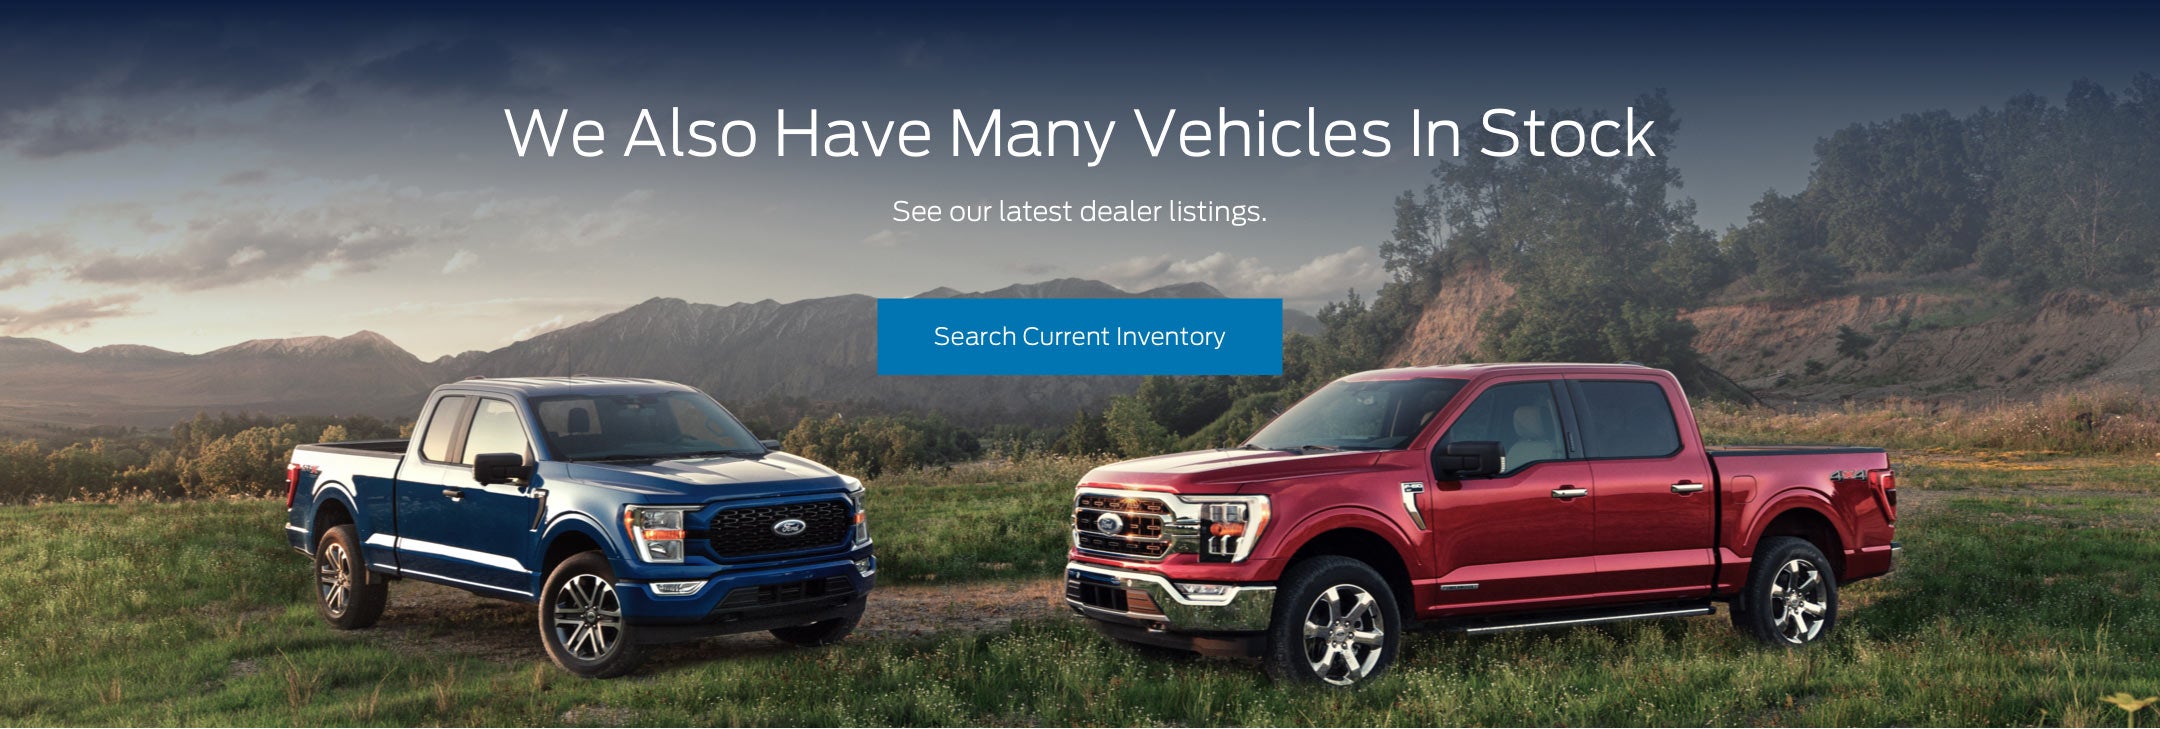 Ford vehicles in stock | Earnhardt Ford in Chandler AZ